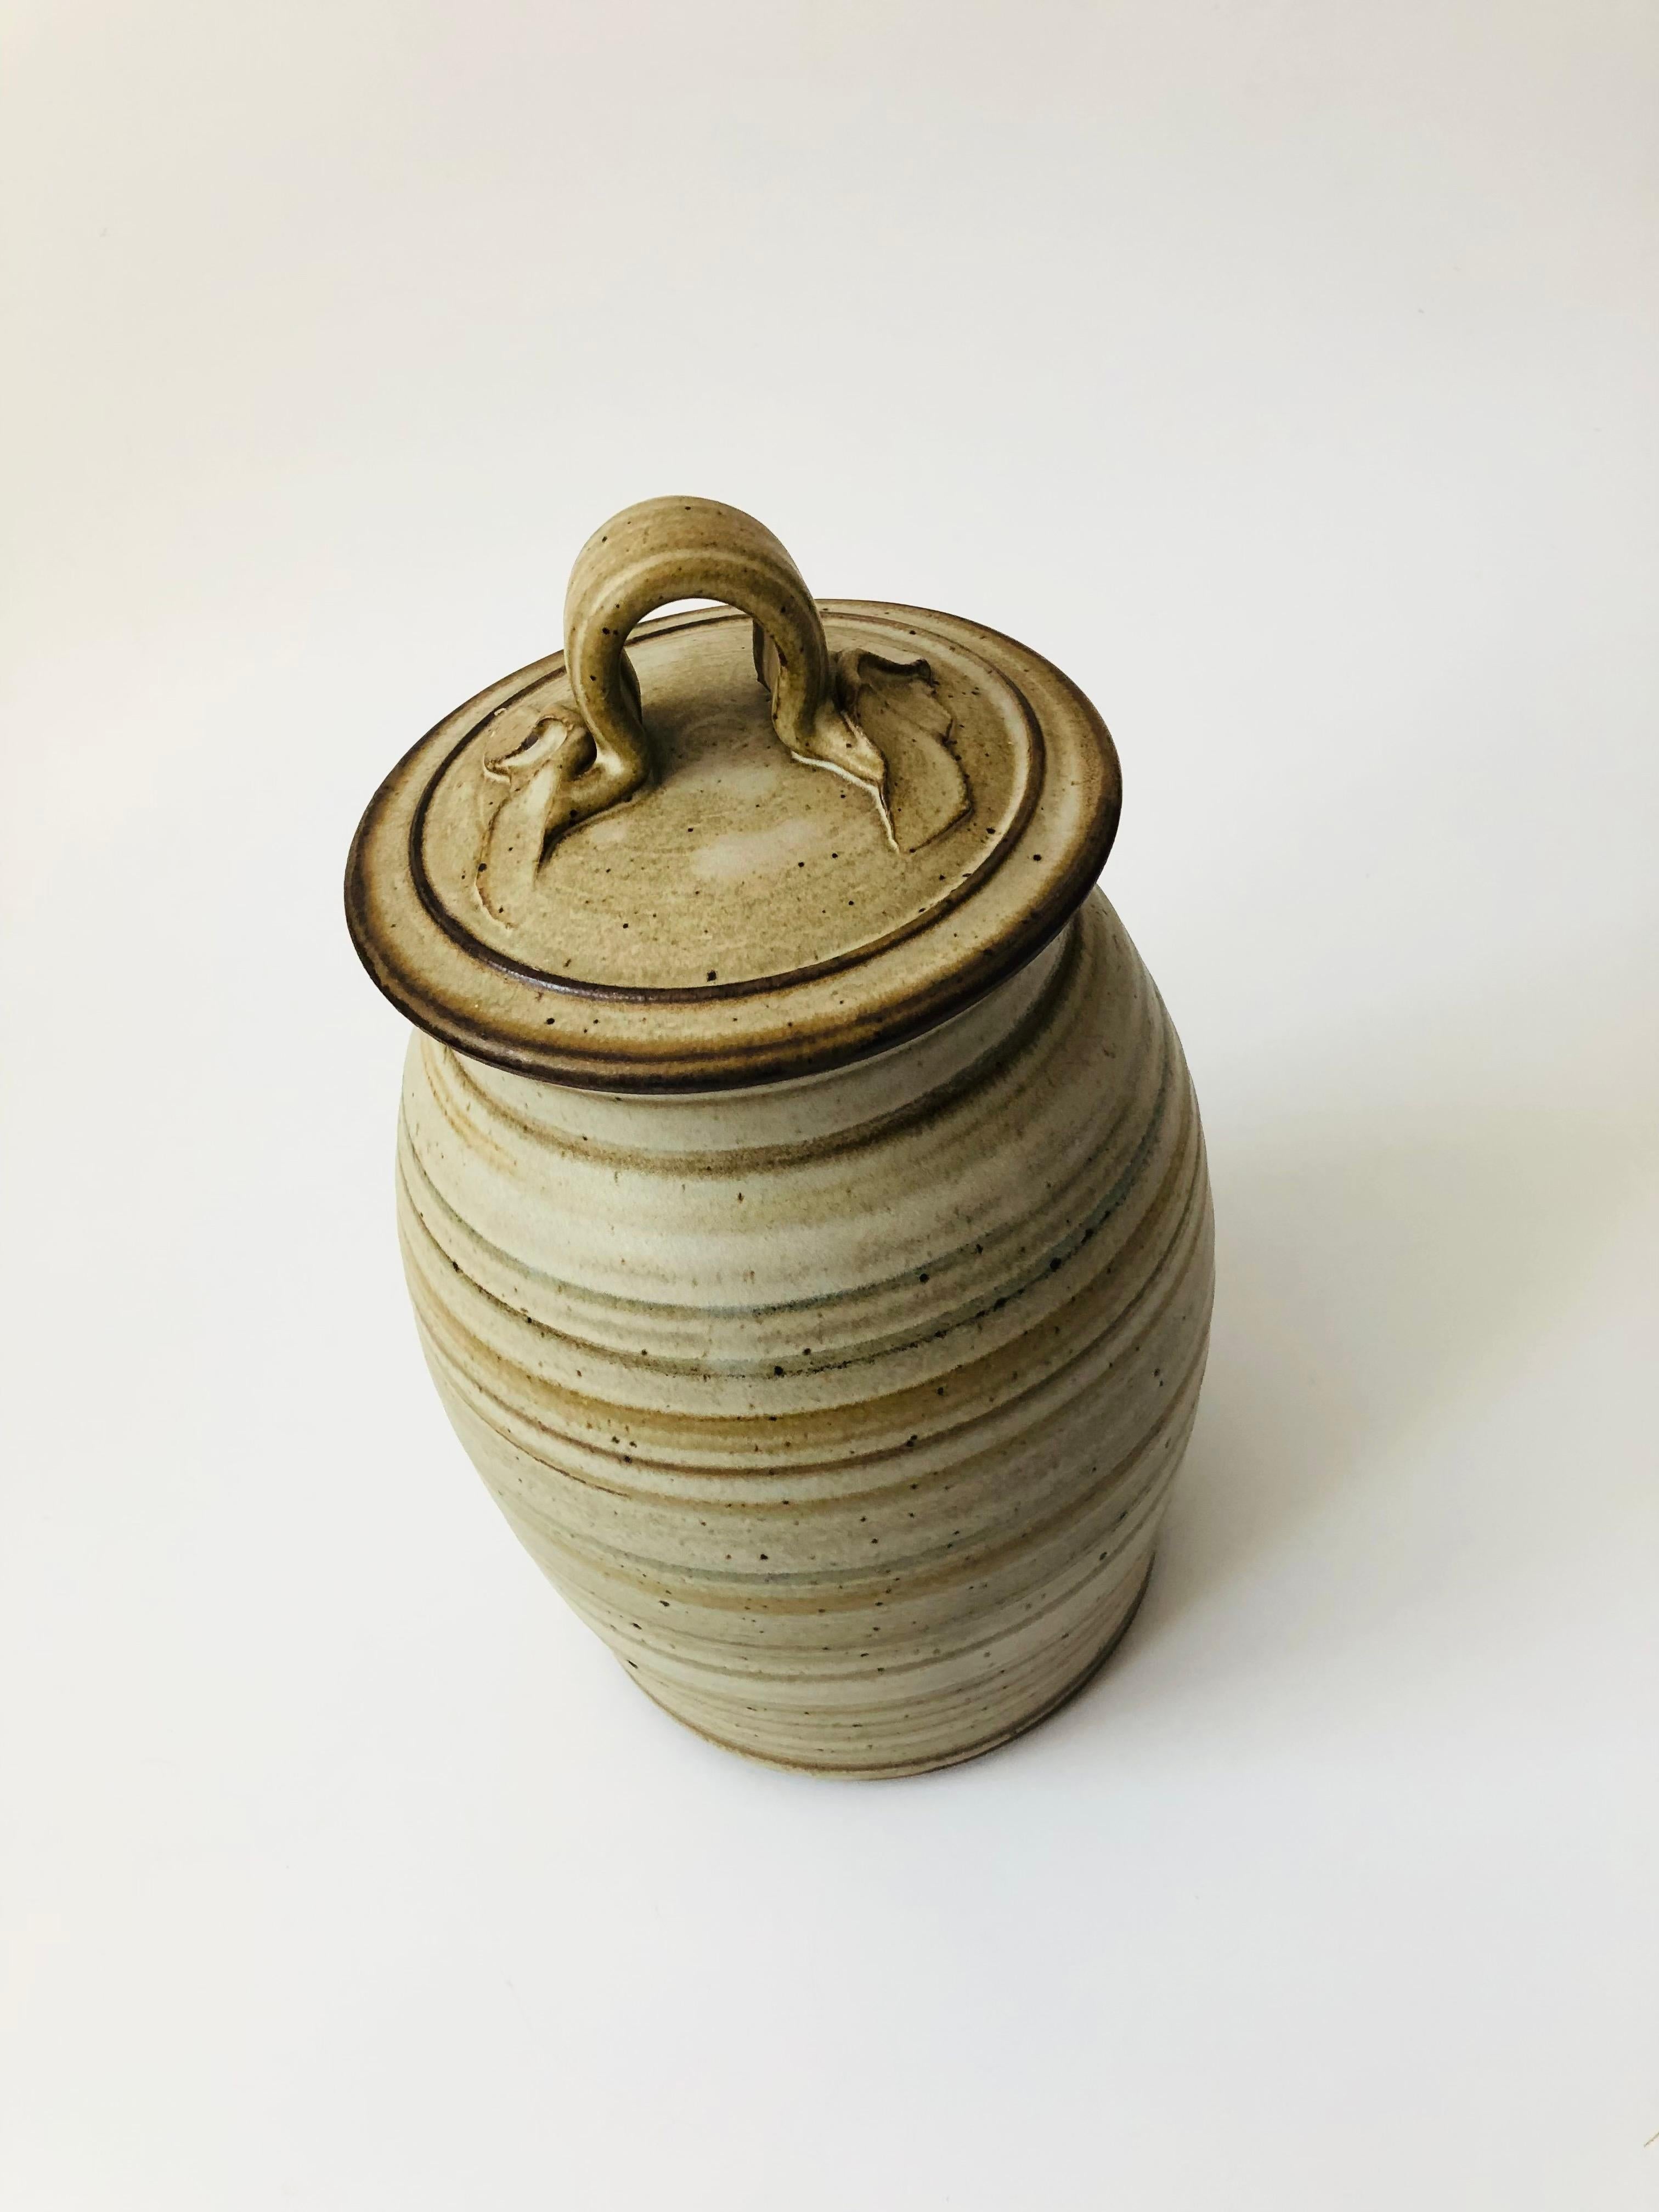 A vintage handmade studio pottery canister by artist Tim Wedel. Finished in a beautiful variety of interchanging bands of earth tone glazes. Great organic quality to the handle on the lid and a nice large size for storage. Signed on the base.